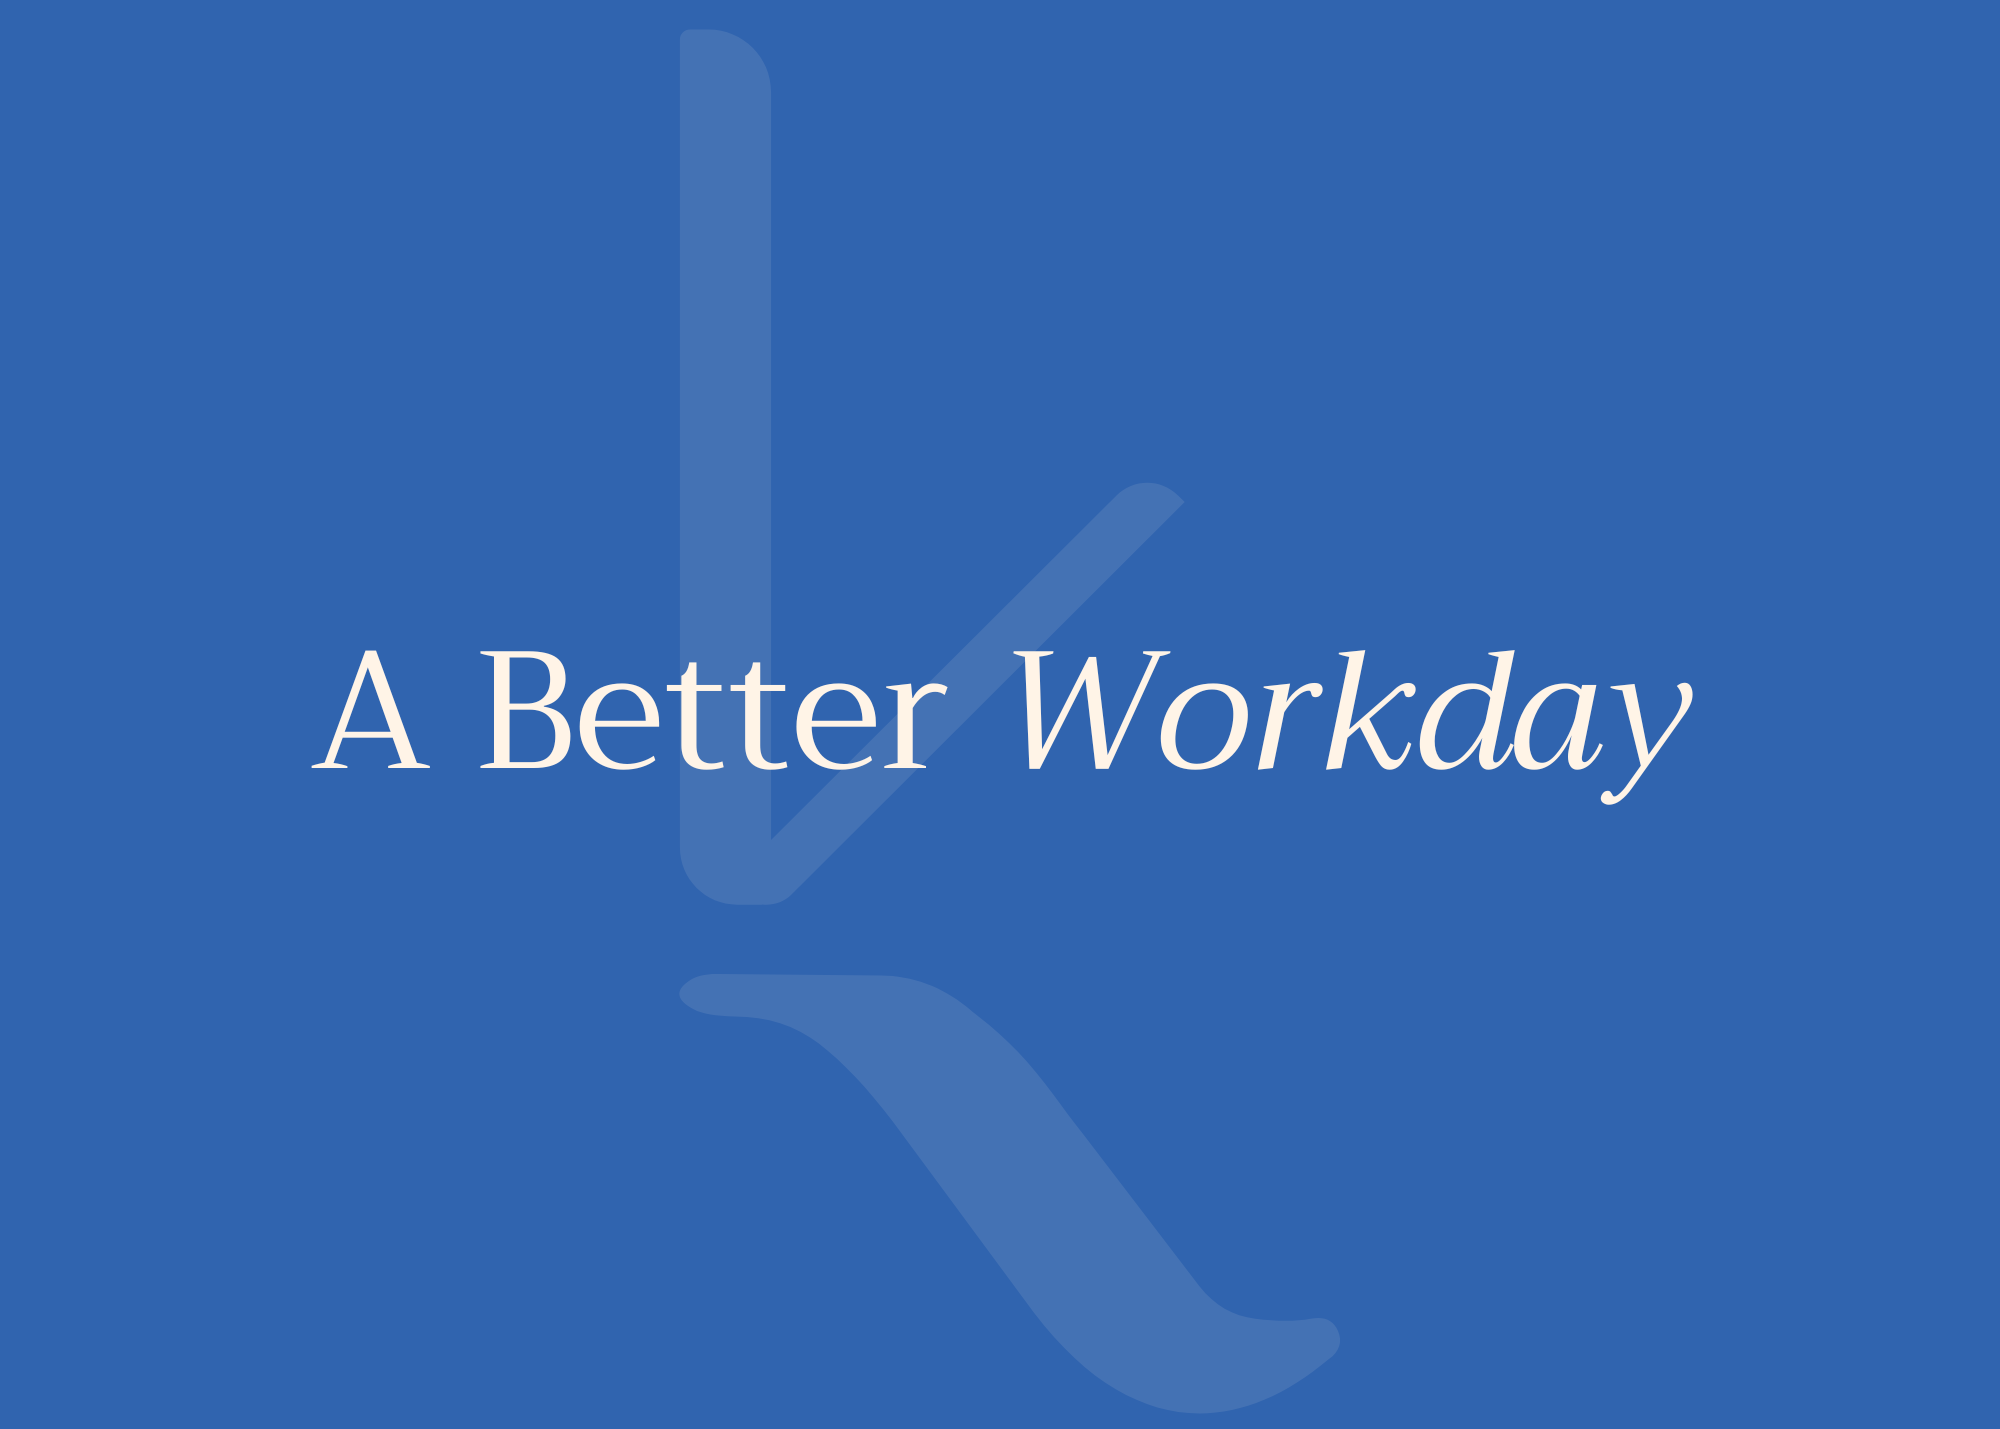 A Better workday